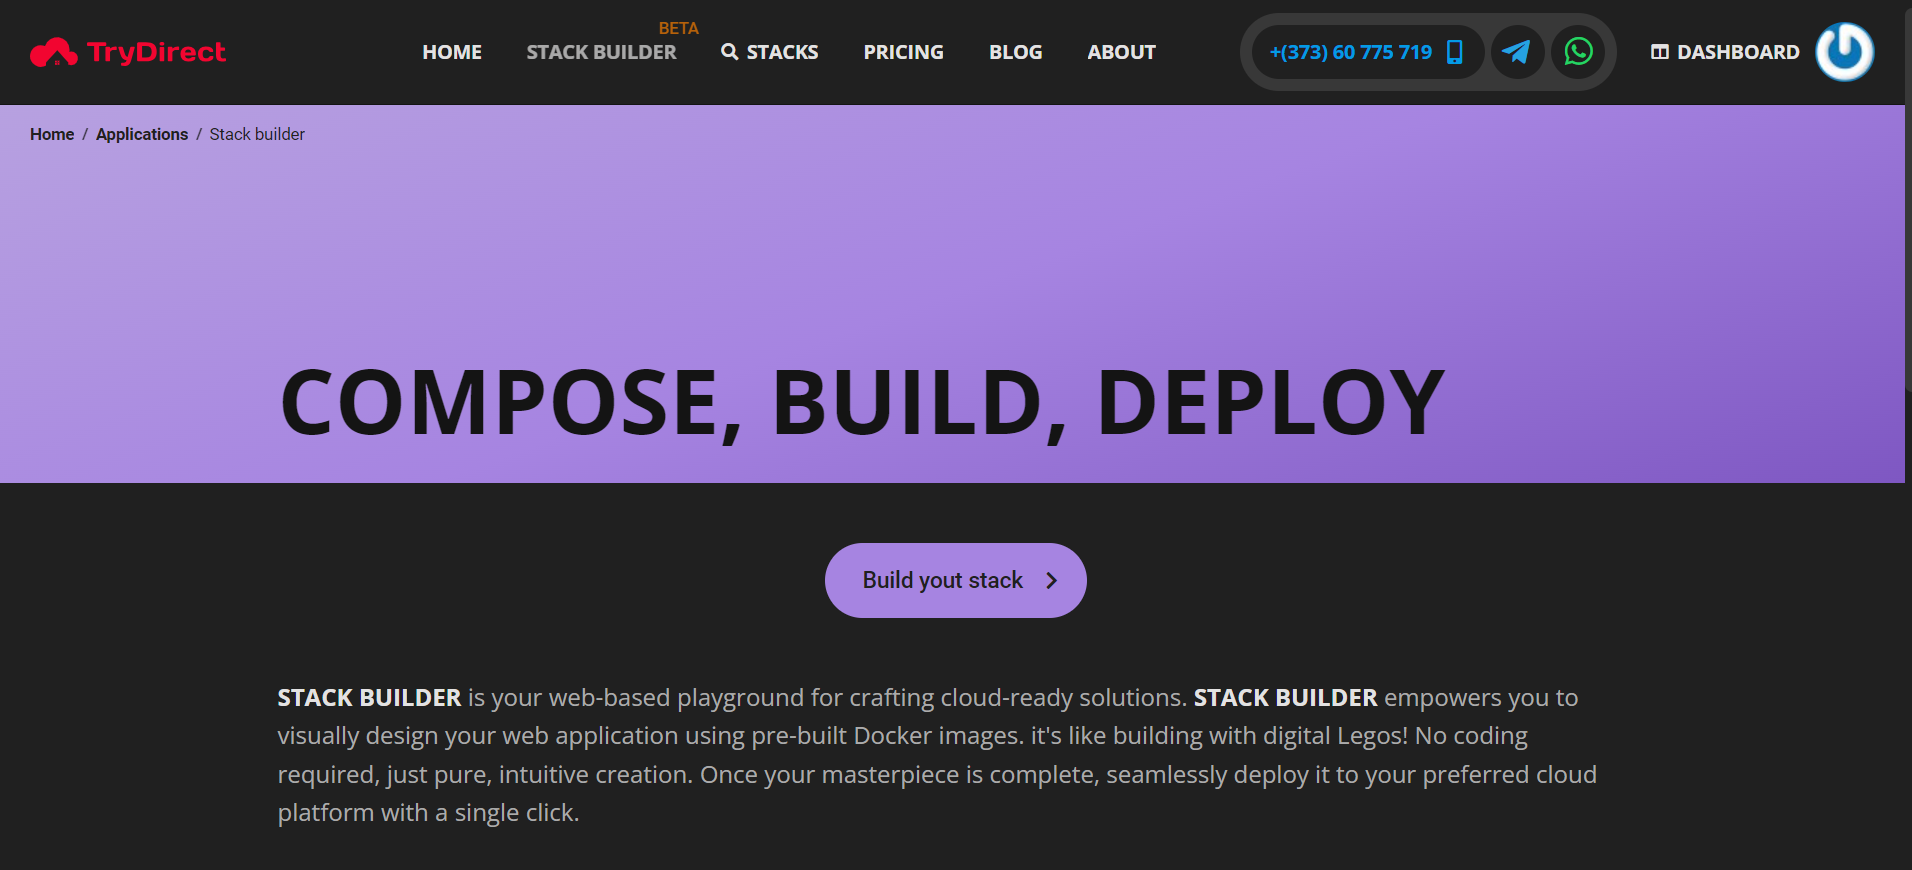 image: Click build your stack